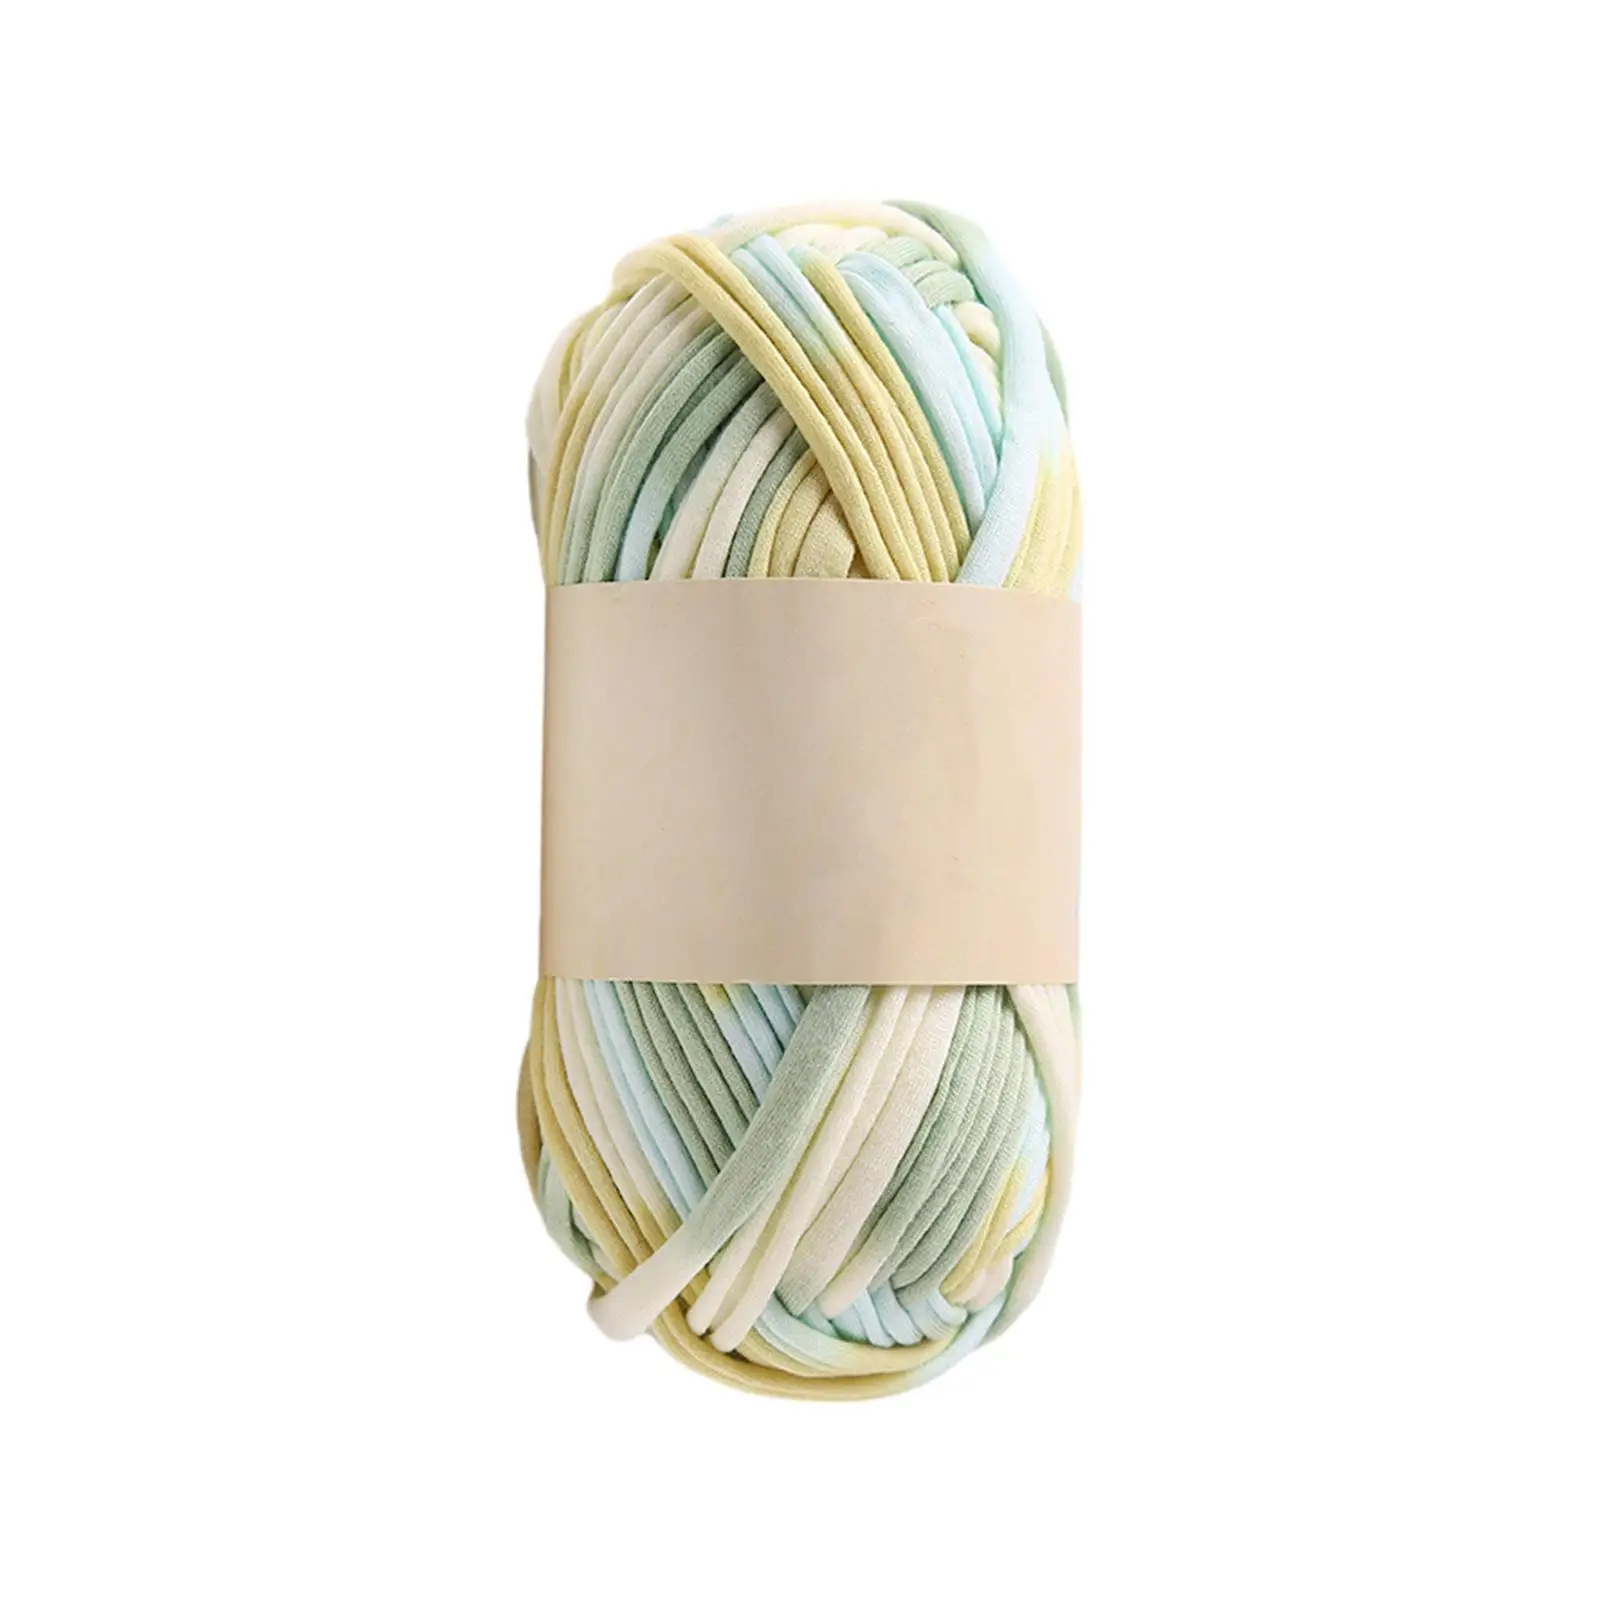 Knitted Yarn Bag Making Supplies Weaving Thread Easy to Knit Carpet Yarn T Shirt Yarn for Rugs Coasters Pillow Baskets Cushion